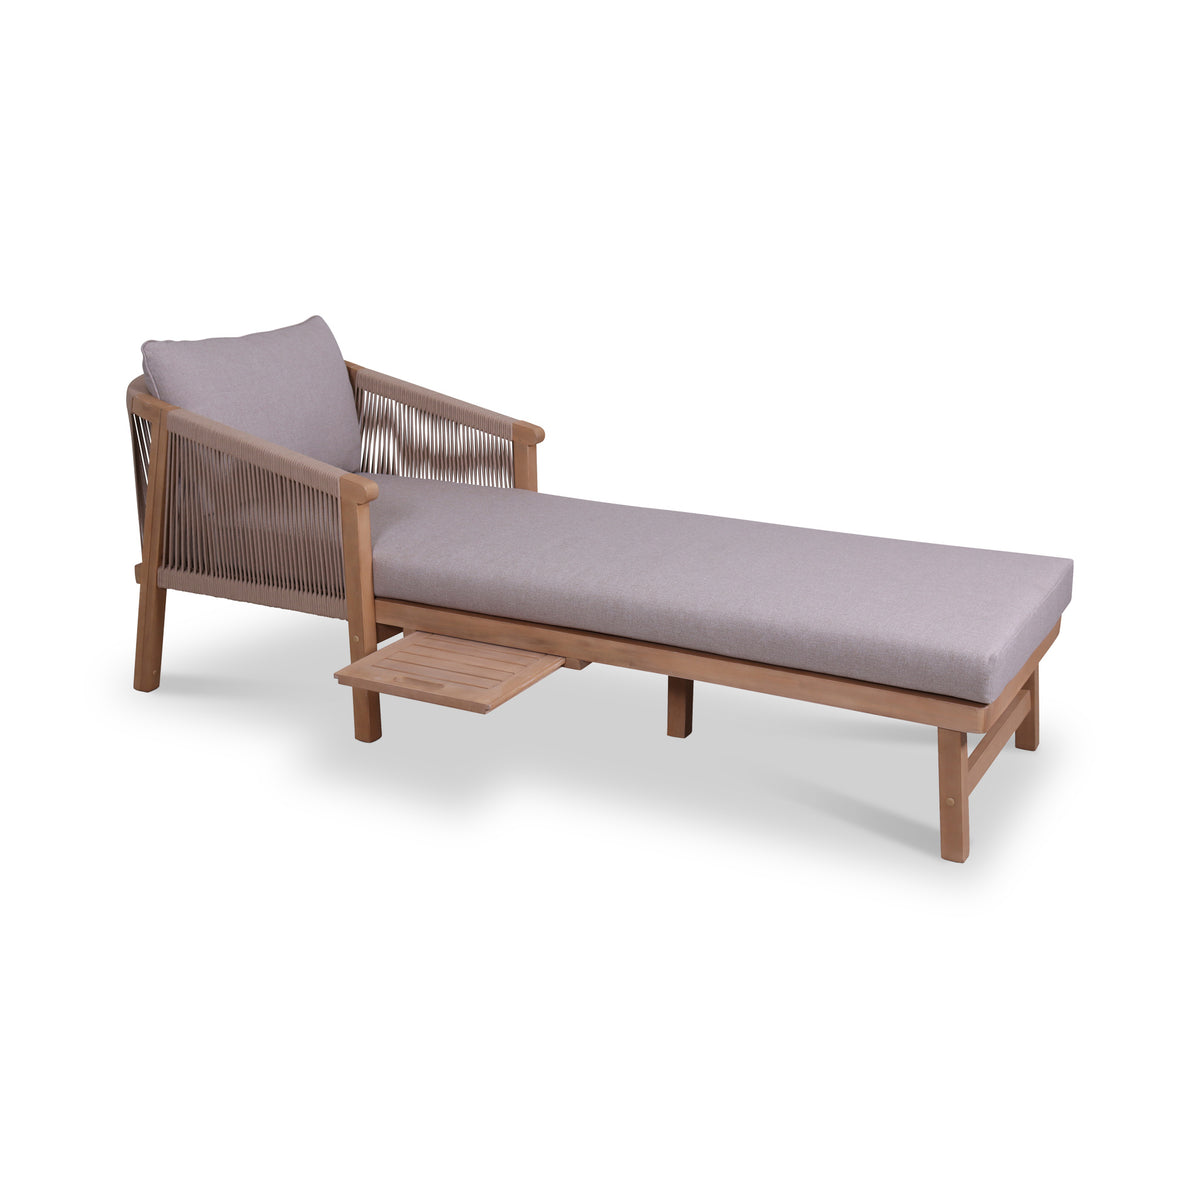 Roma FSC Sunlounger with Pullout Table from Roseland Furniture